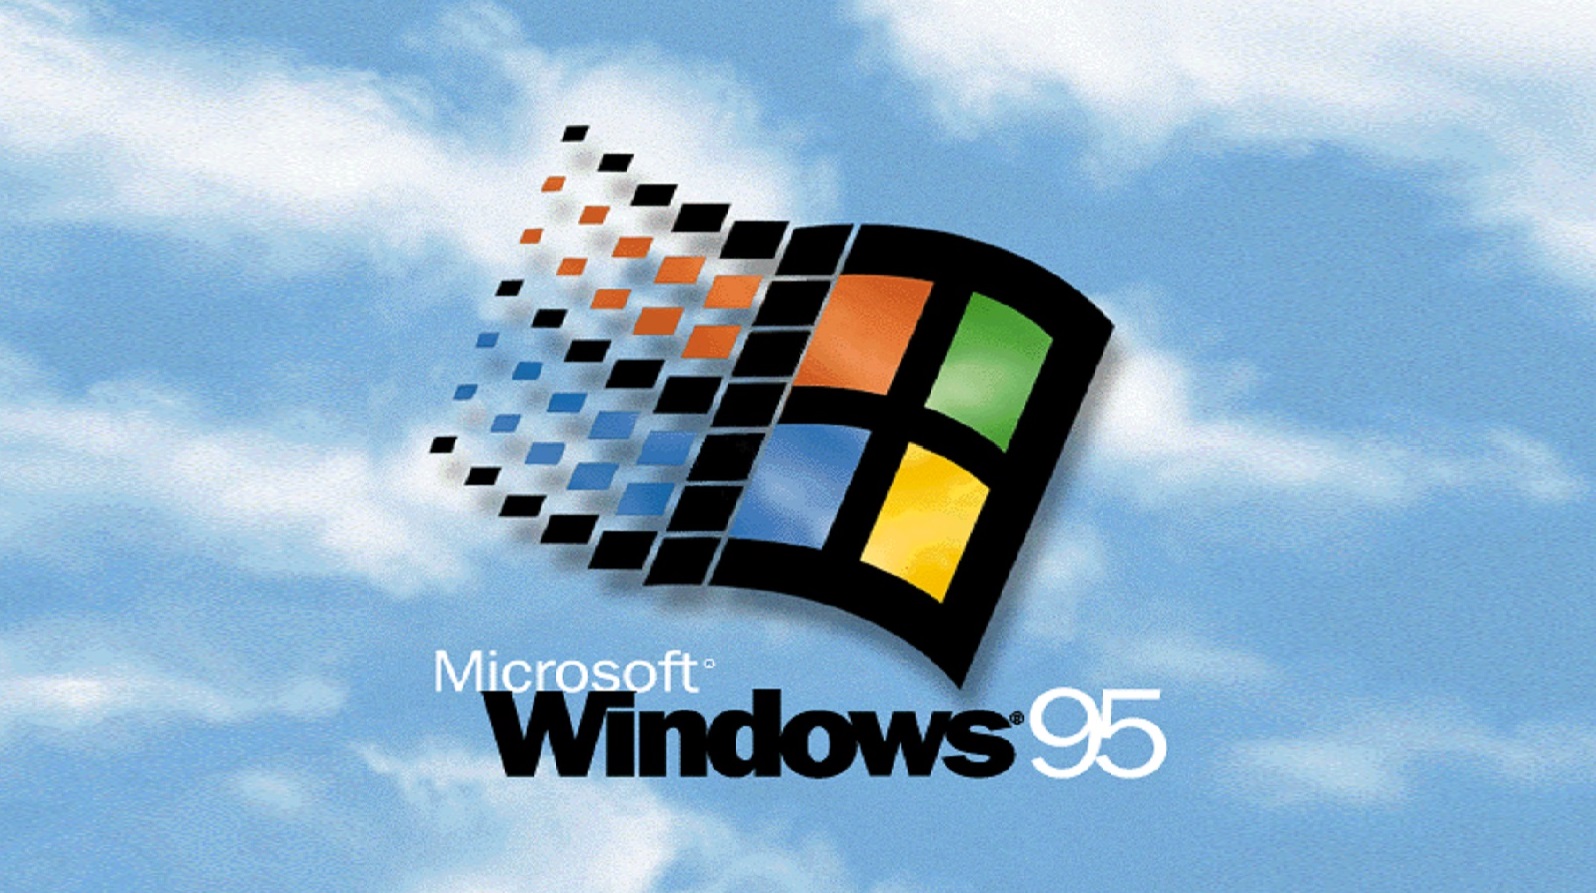 revamped the original windows 95 wallpaper and made into a